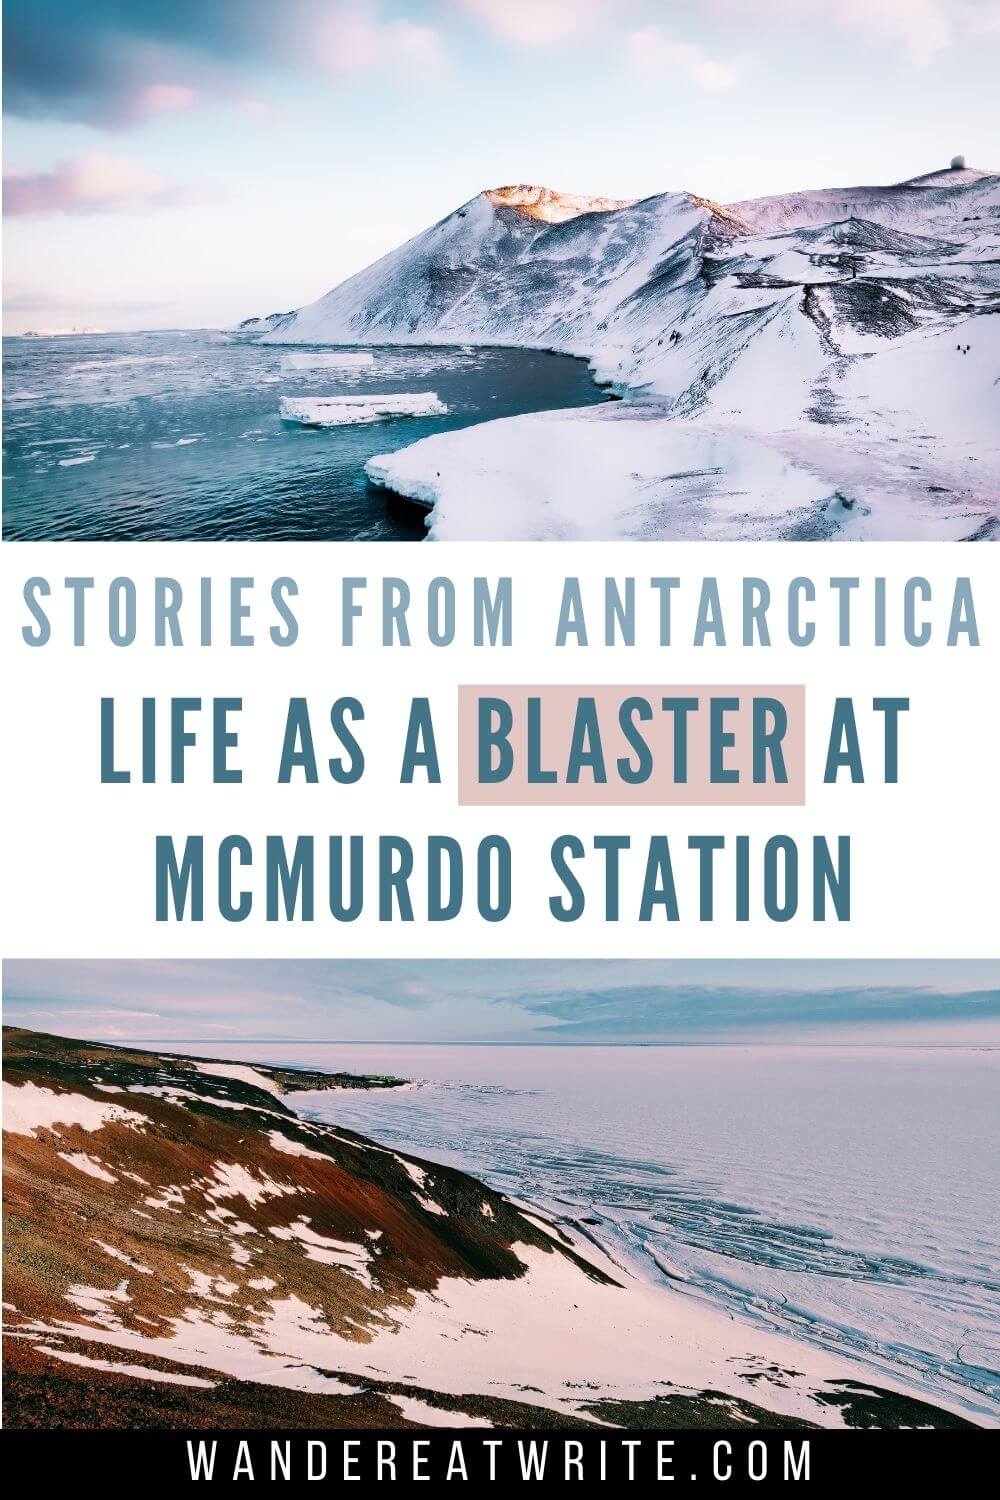 Text: Stories from Antarctica: Life as a blaster at McMurdo Station; top photo- snow-covered mountains and ocean; bottom photo- ice on mountain slope and frozen sea ice